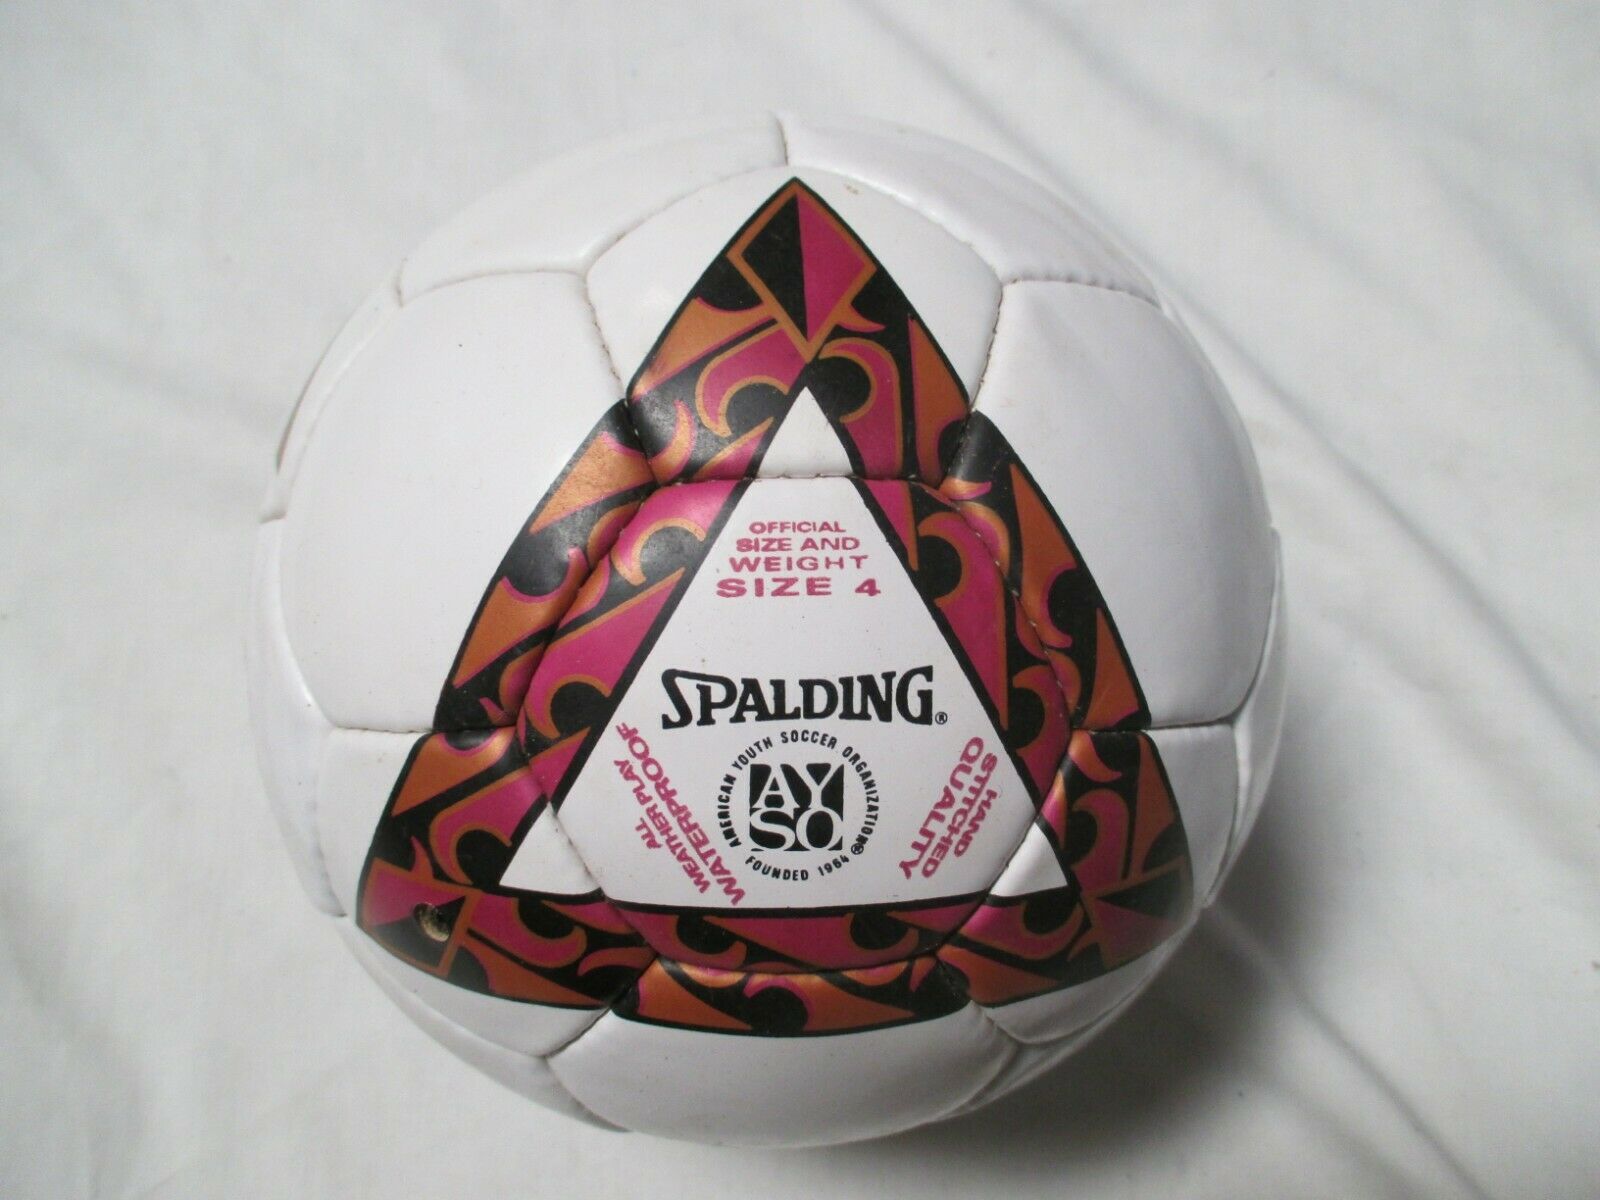 SPALDING AYSO  SOCCER BALL  SIZE #4 (WHITE/PURPLE/GOLD)